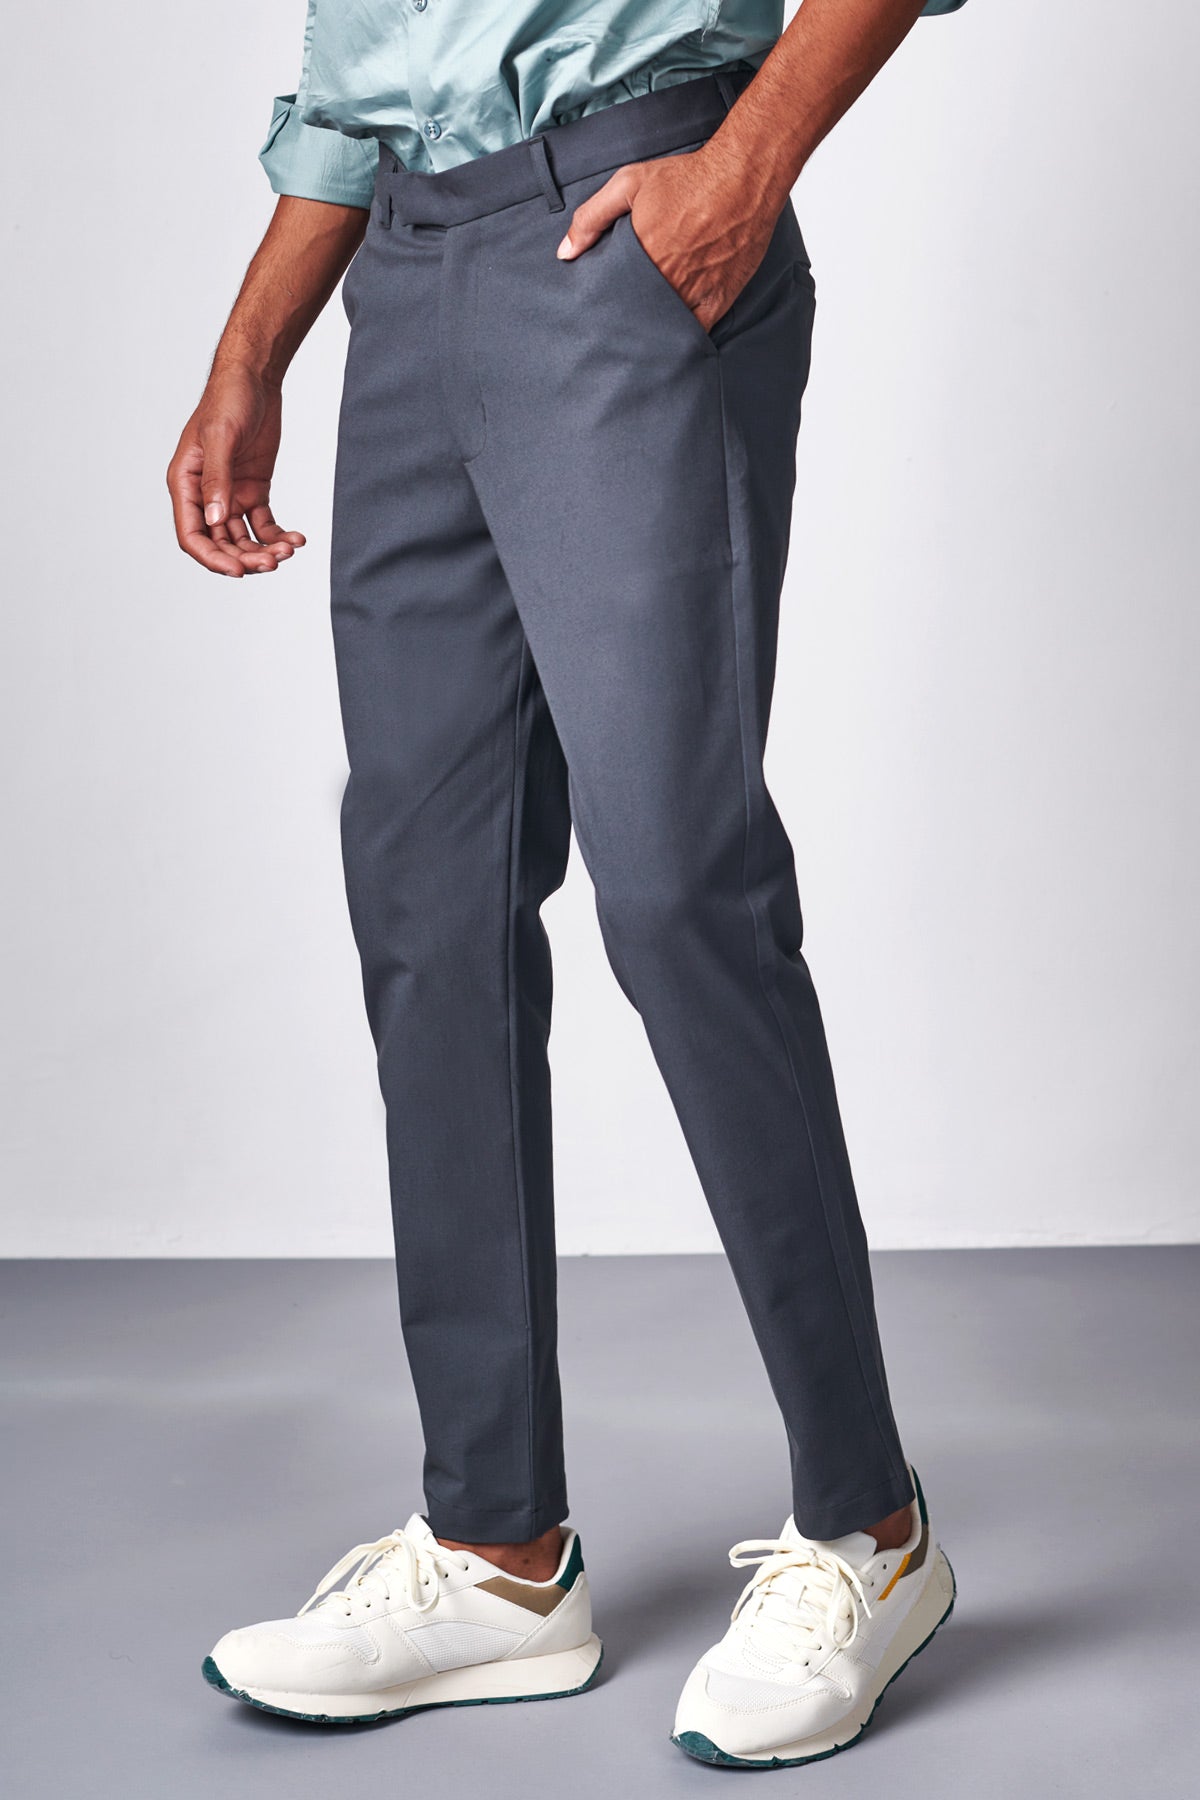 The 24 Marble Grey Trouser